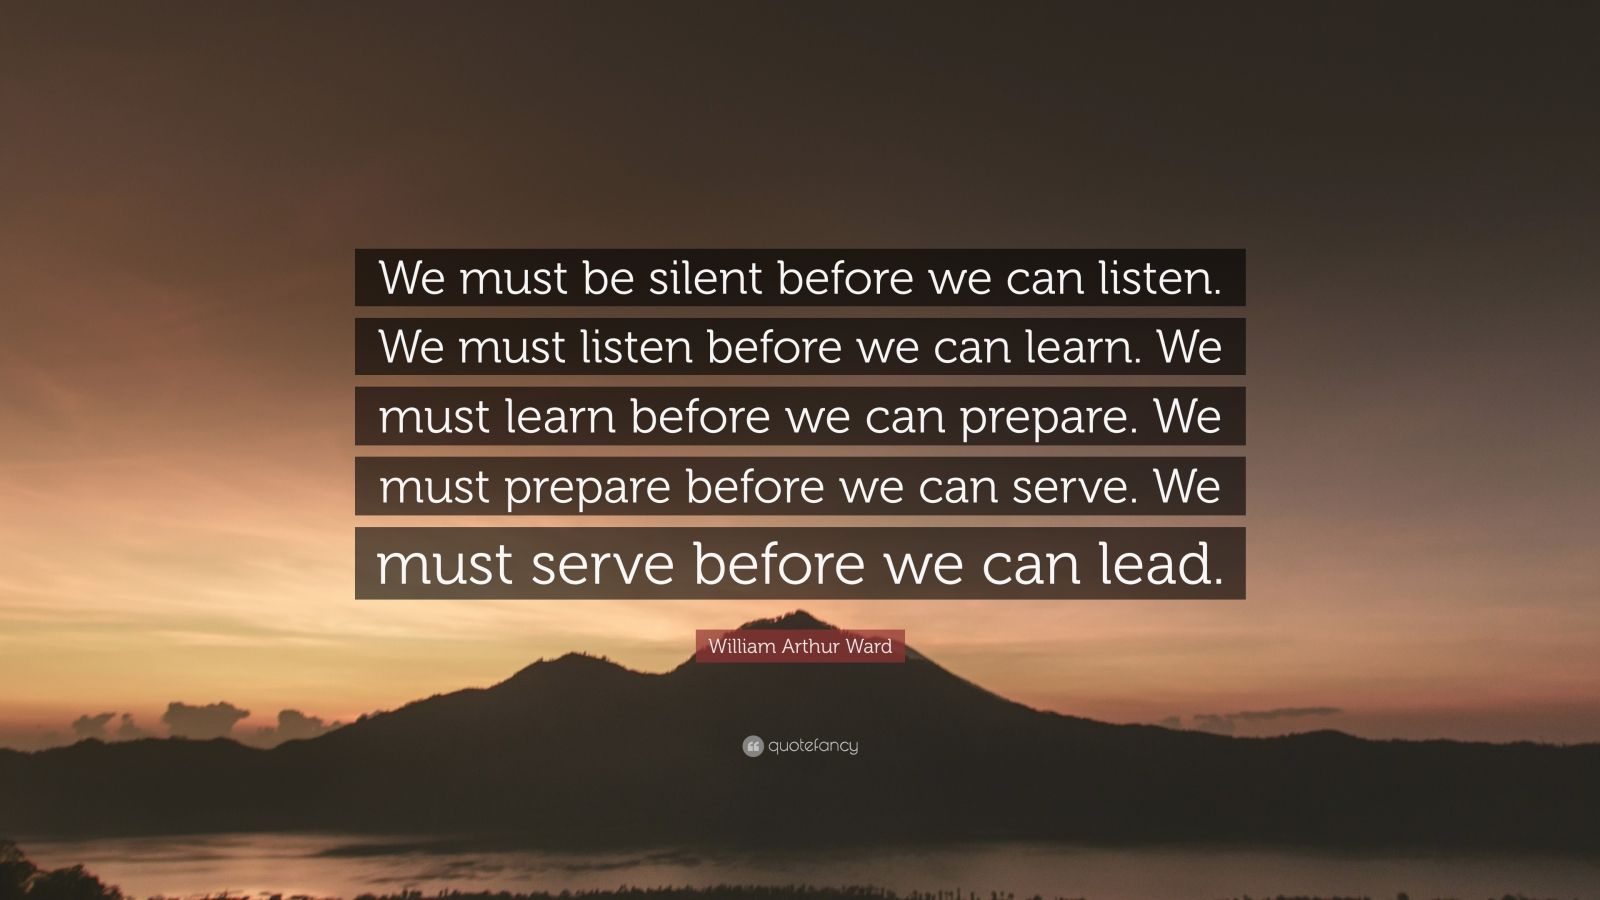 William Arthur Ward Quote: “We must be silent before we can listen. We